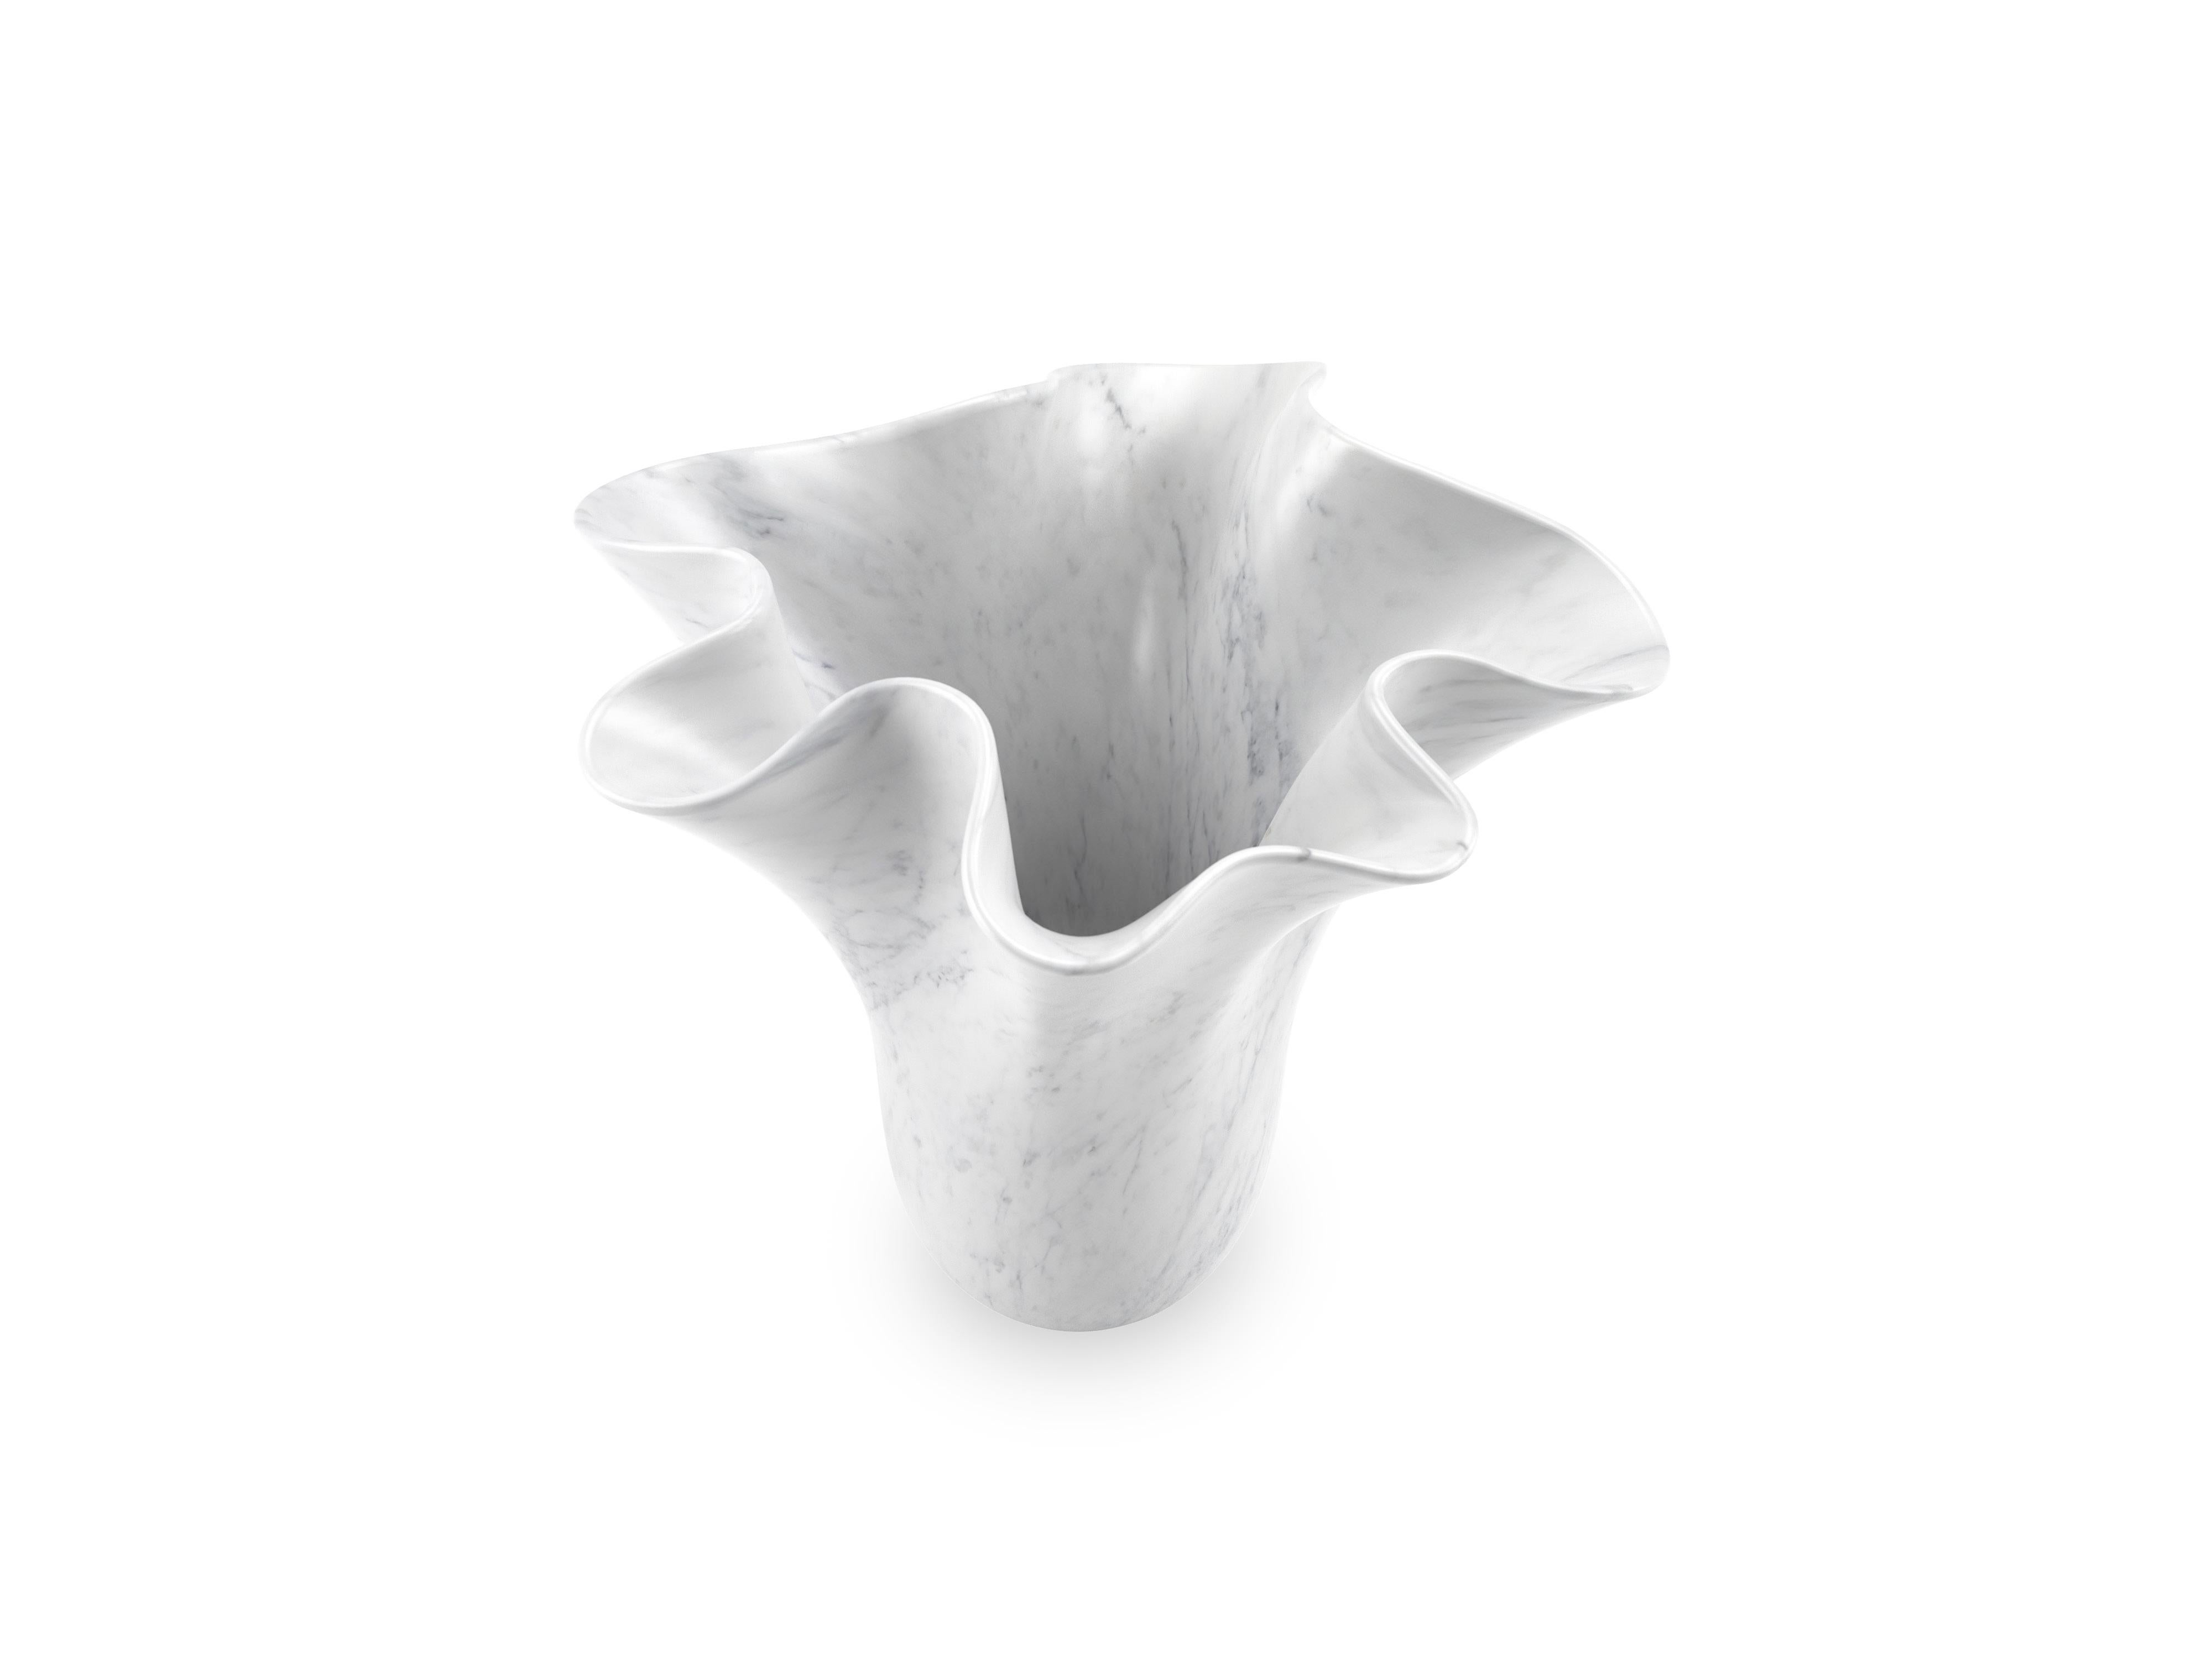 Italian Sculptural Vase White Carrara Marble, Flower Shape Vessel, Hand Curved Italy For Sale